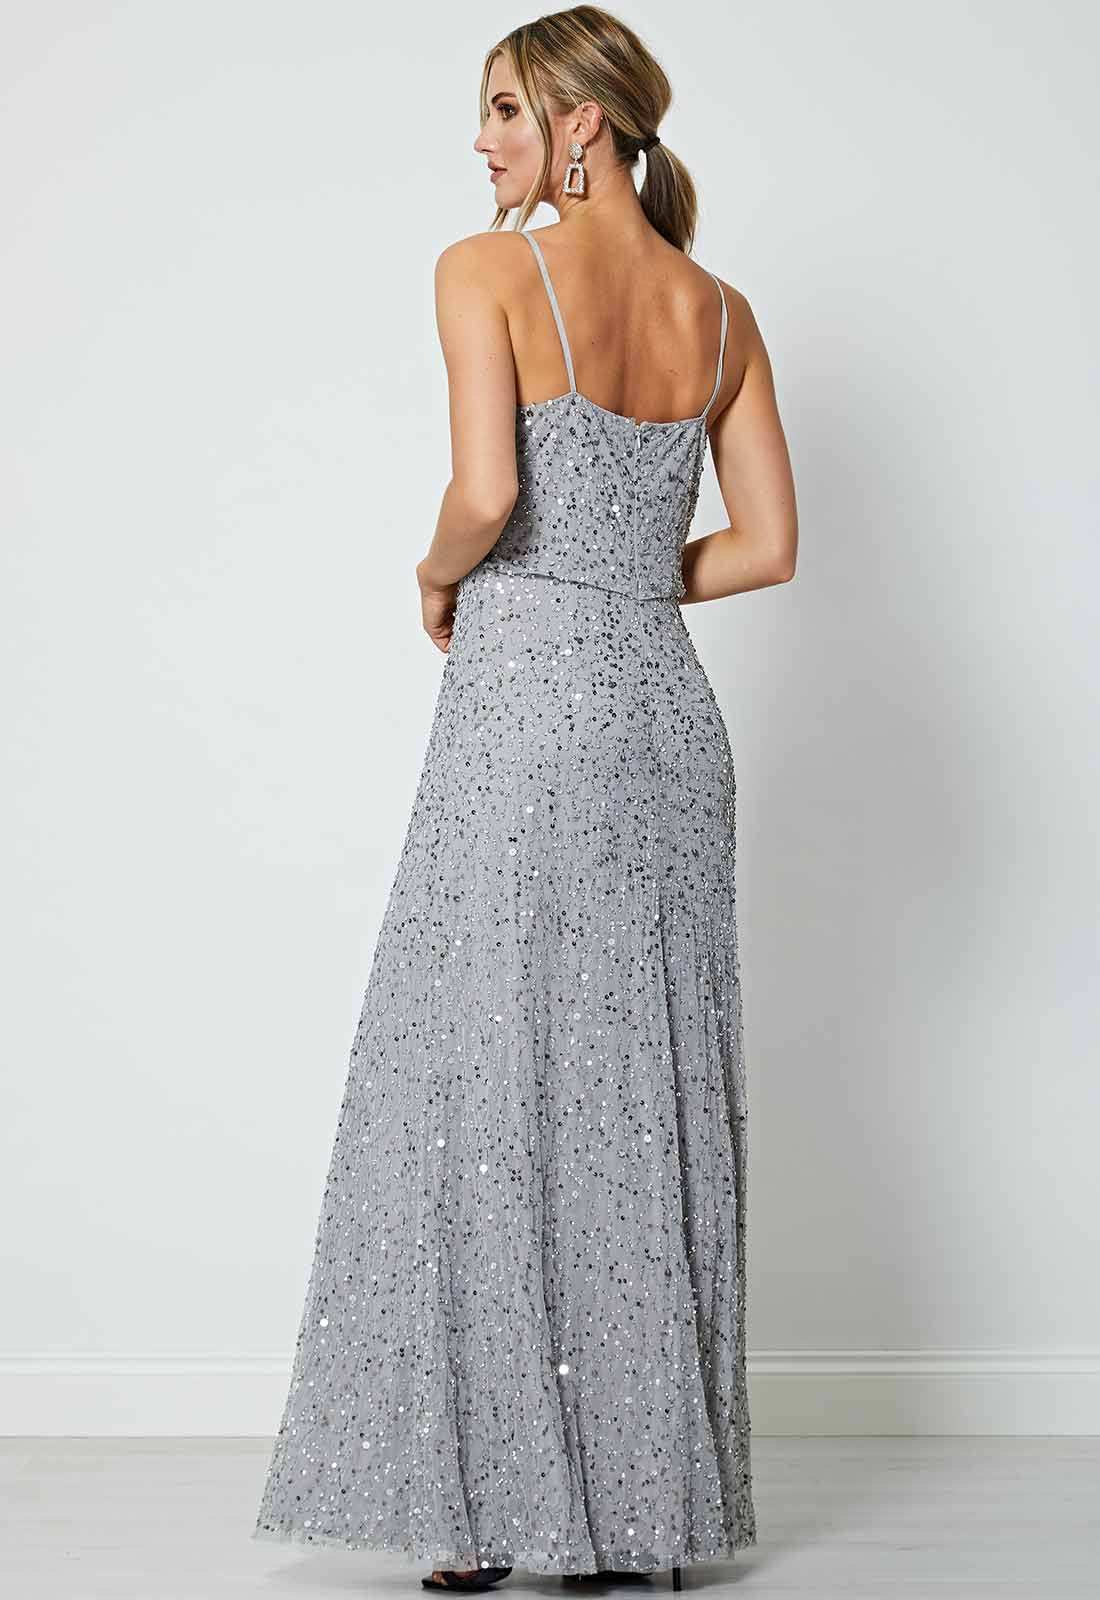 ANGELEYE Silver Lucy Embellished Maxi Dress-73688